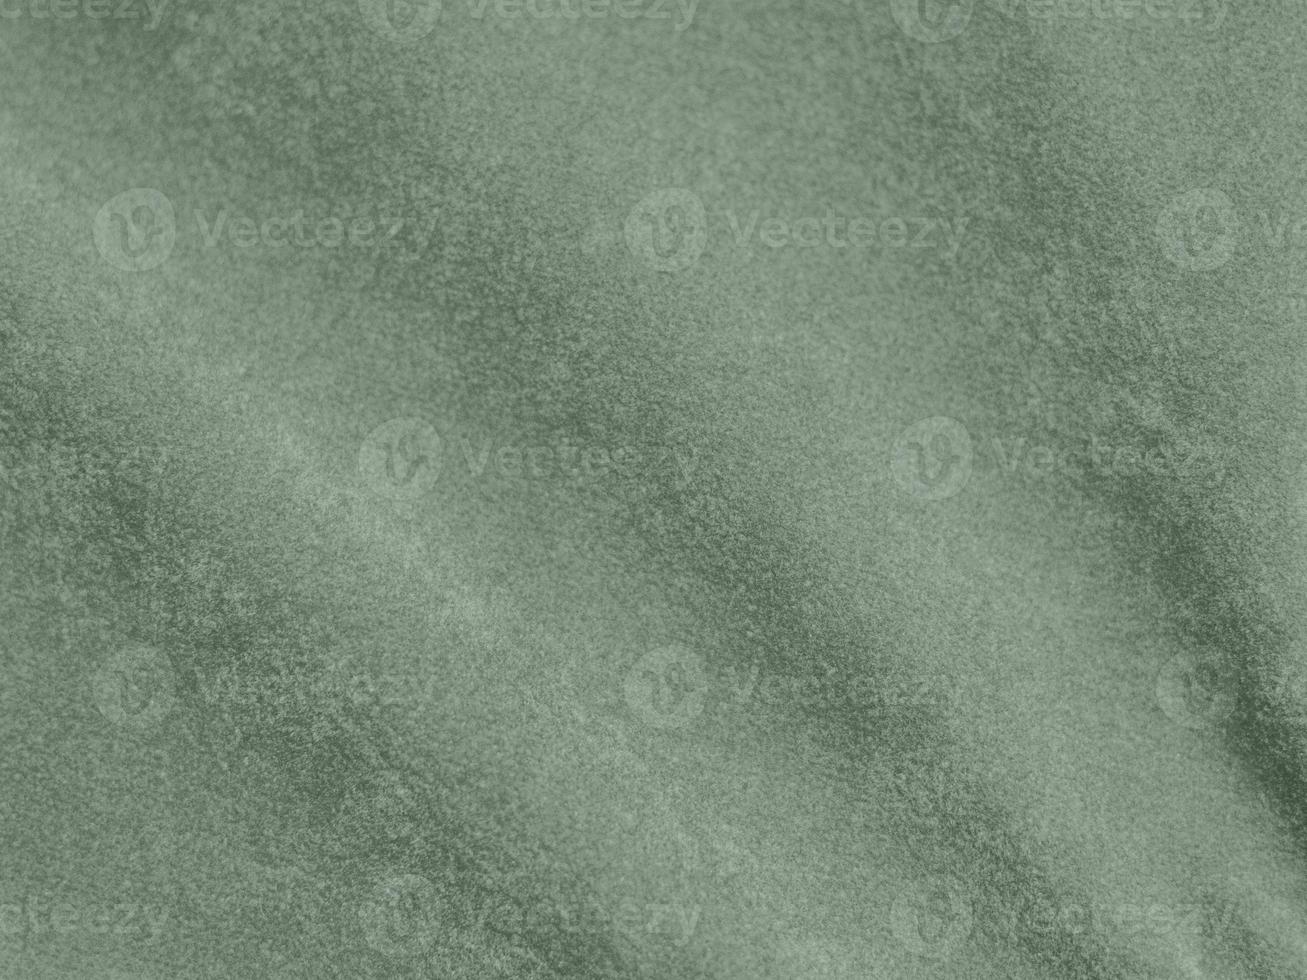 Olive green color velvet fabric texture used as background. light Olive green fabric background of soft and smooth textile material. There is space for text. photo